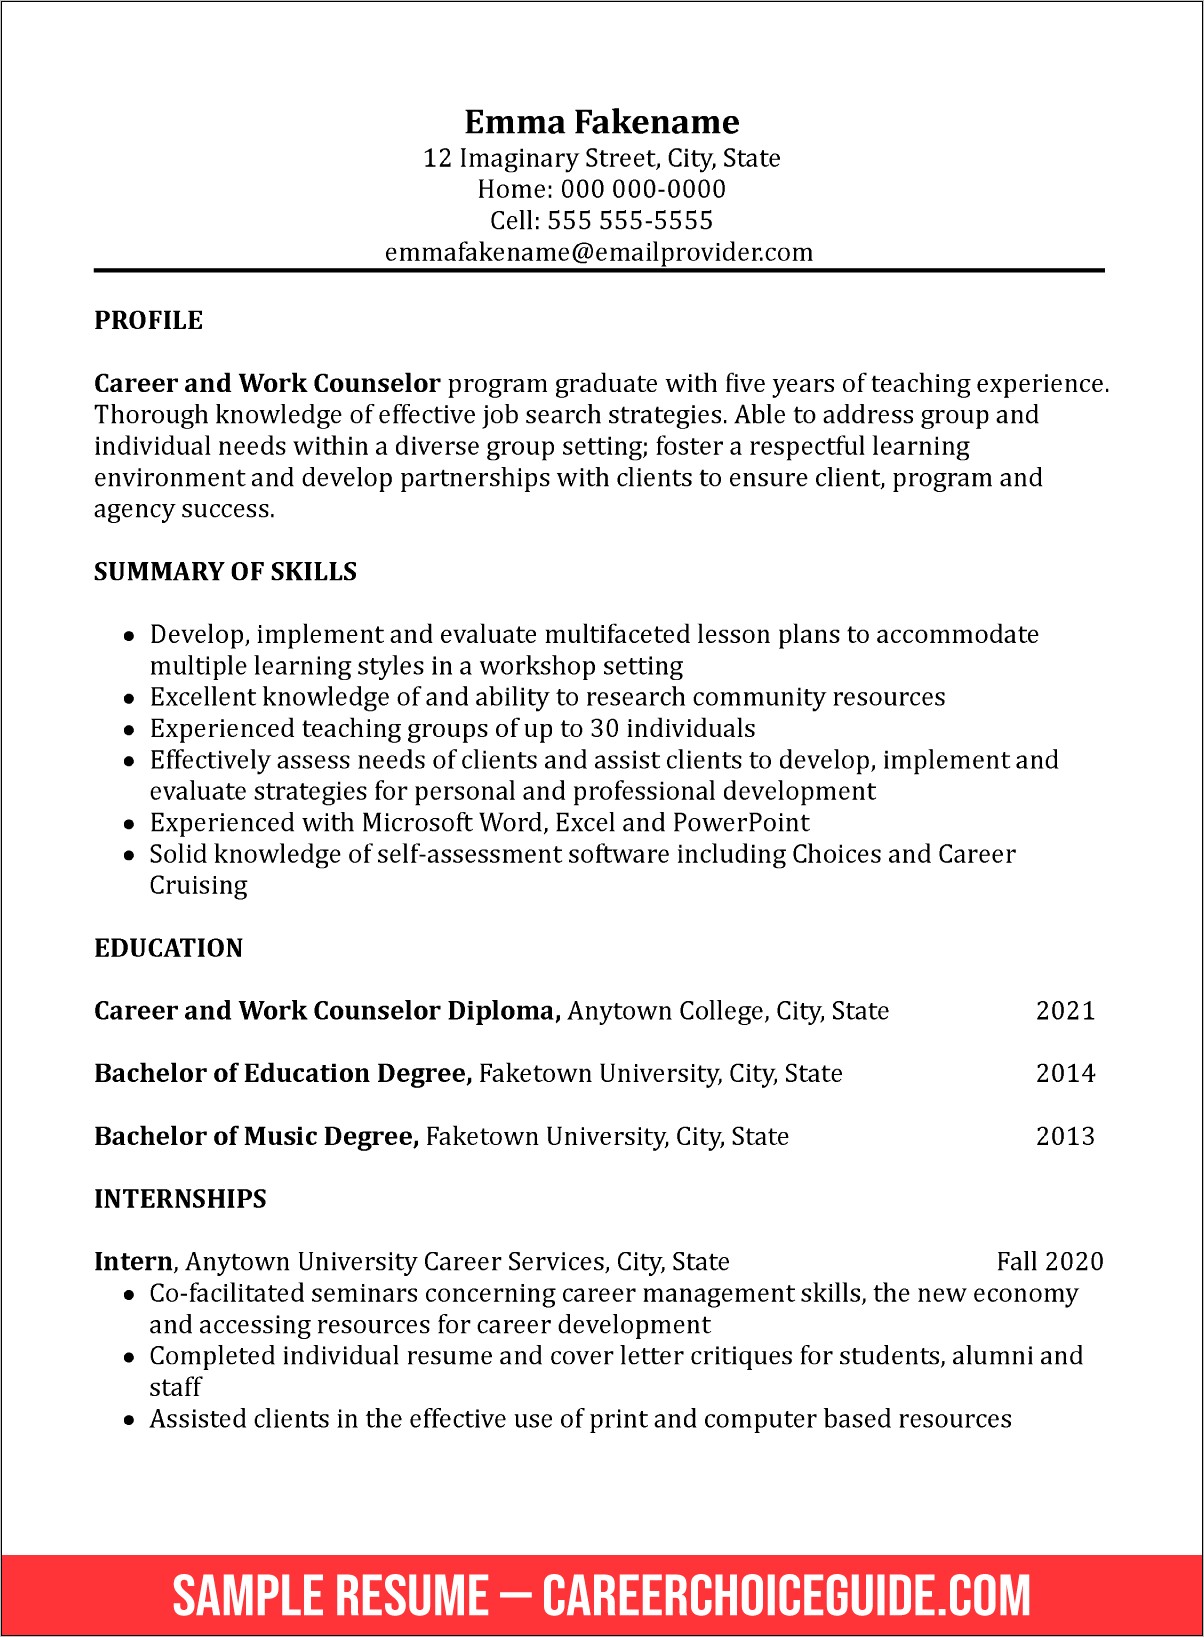 Skills And Experience Resume Sample